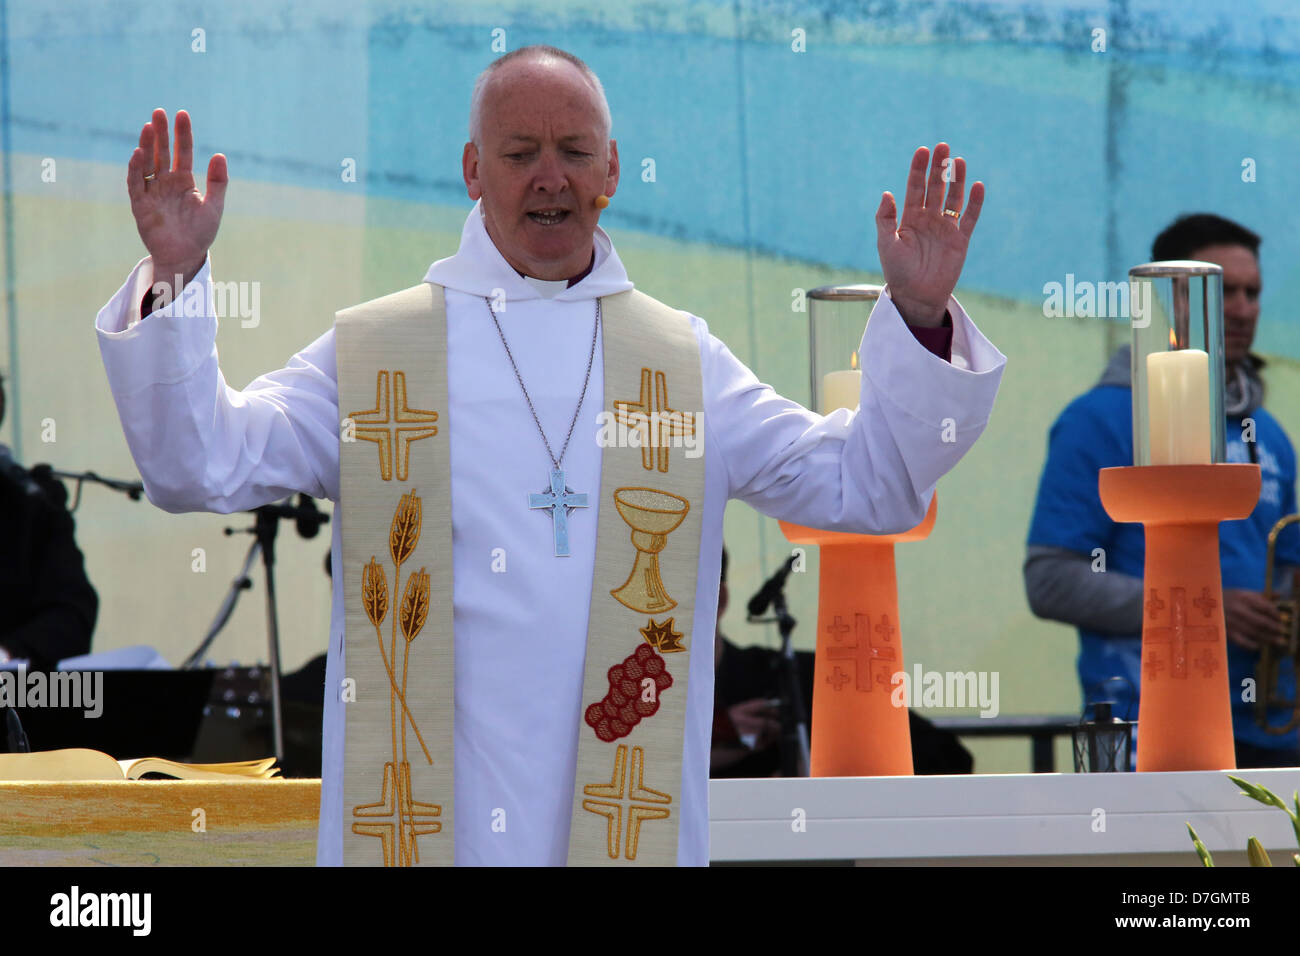 Anglican bishop Nicholas Baines blessing during sunday service at the Evangelical Church Congress in Hamburg Stock Photo